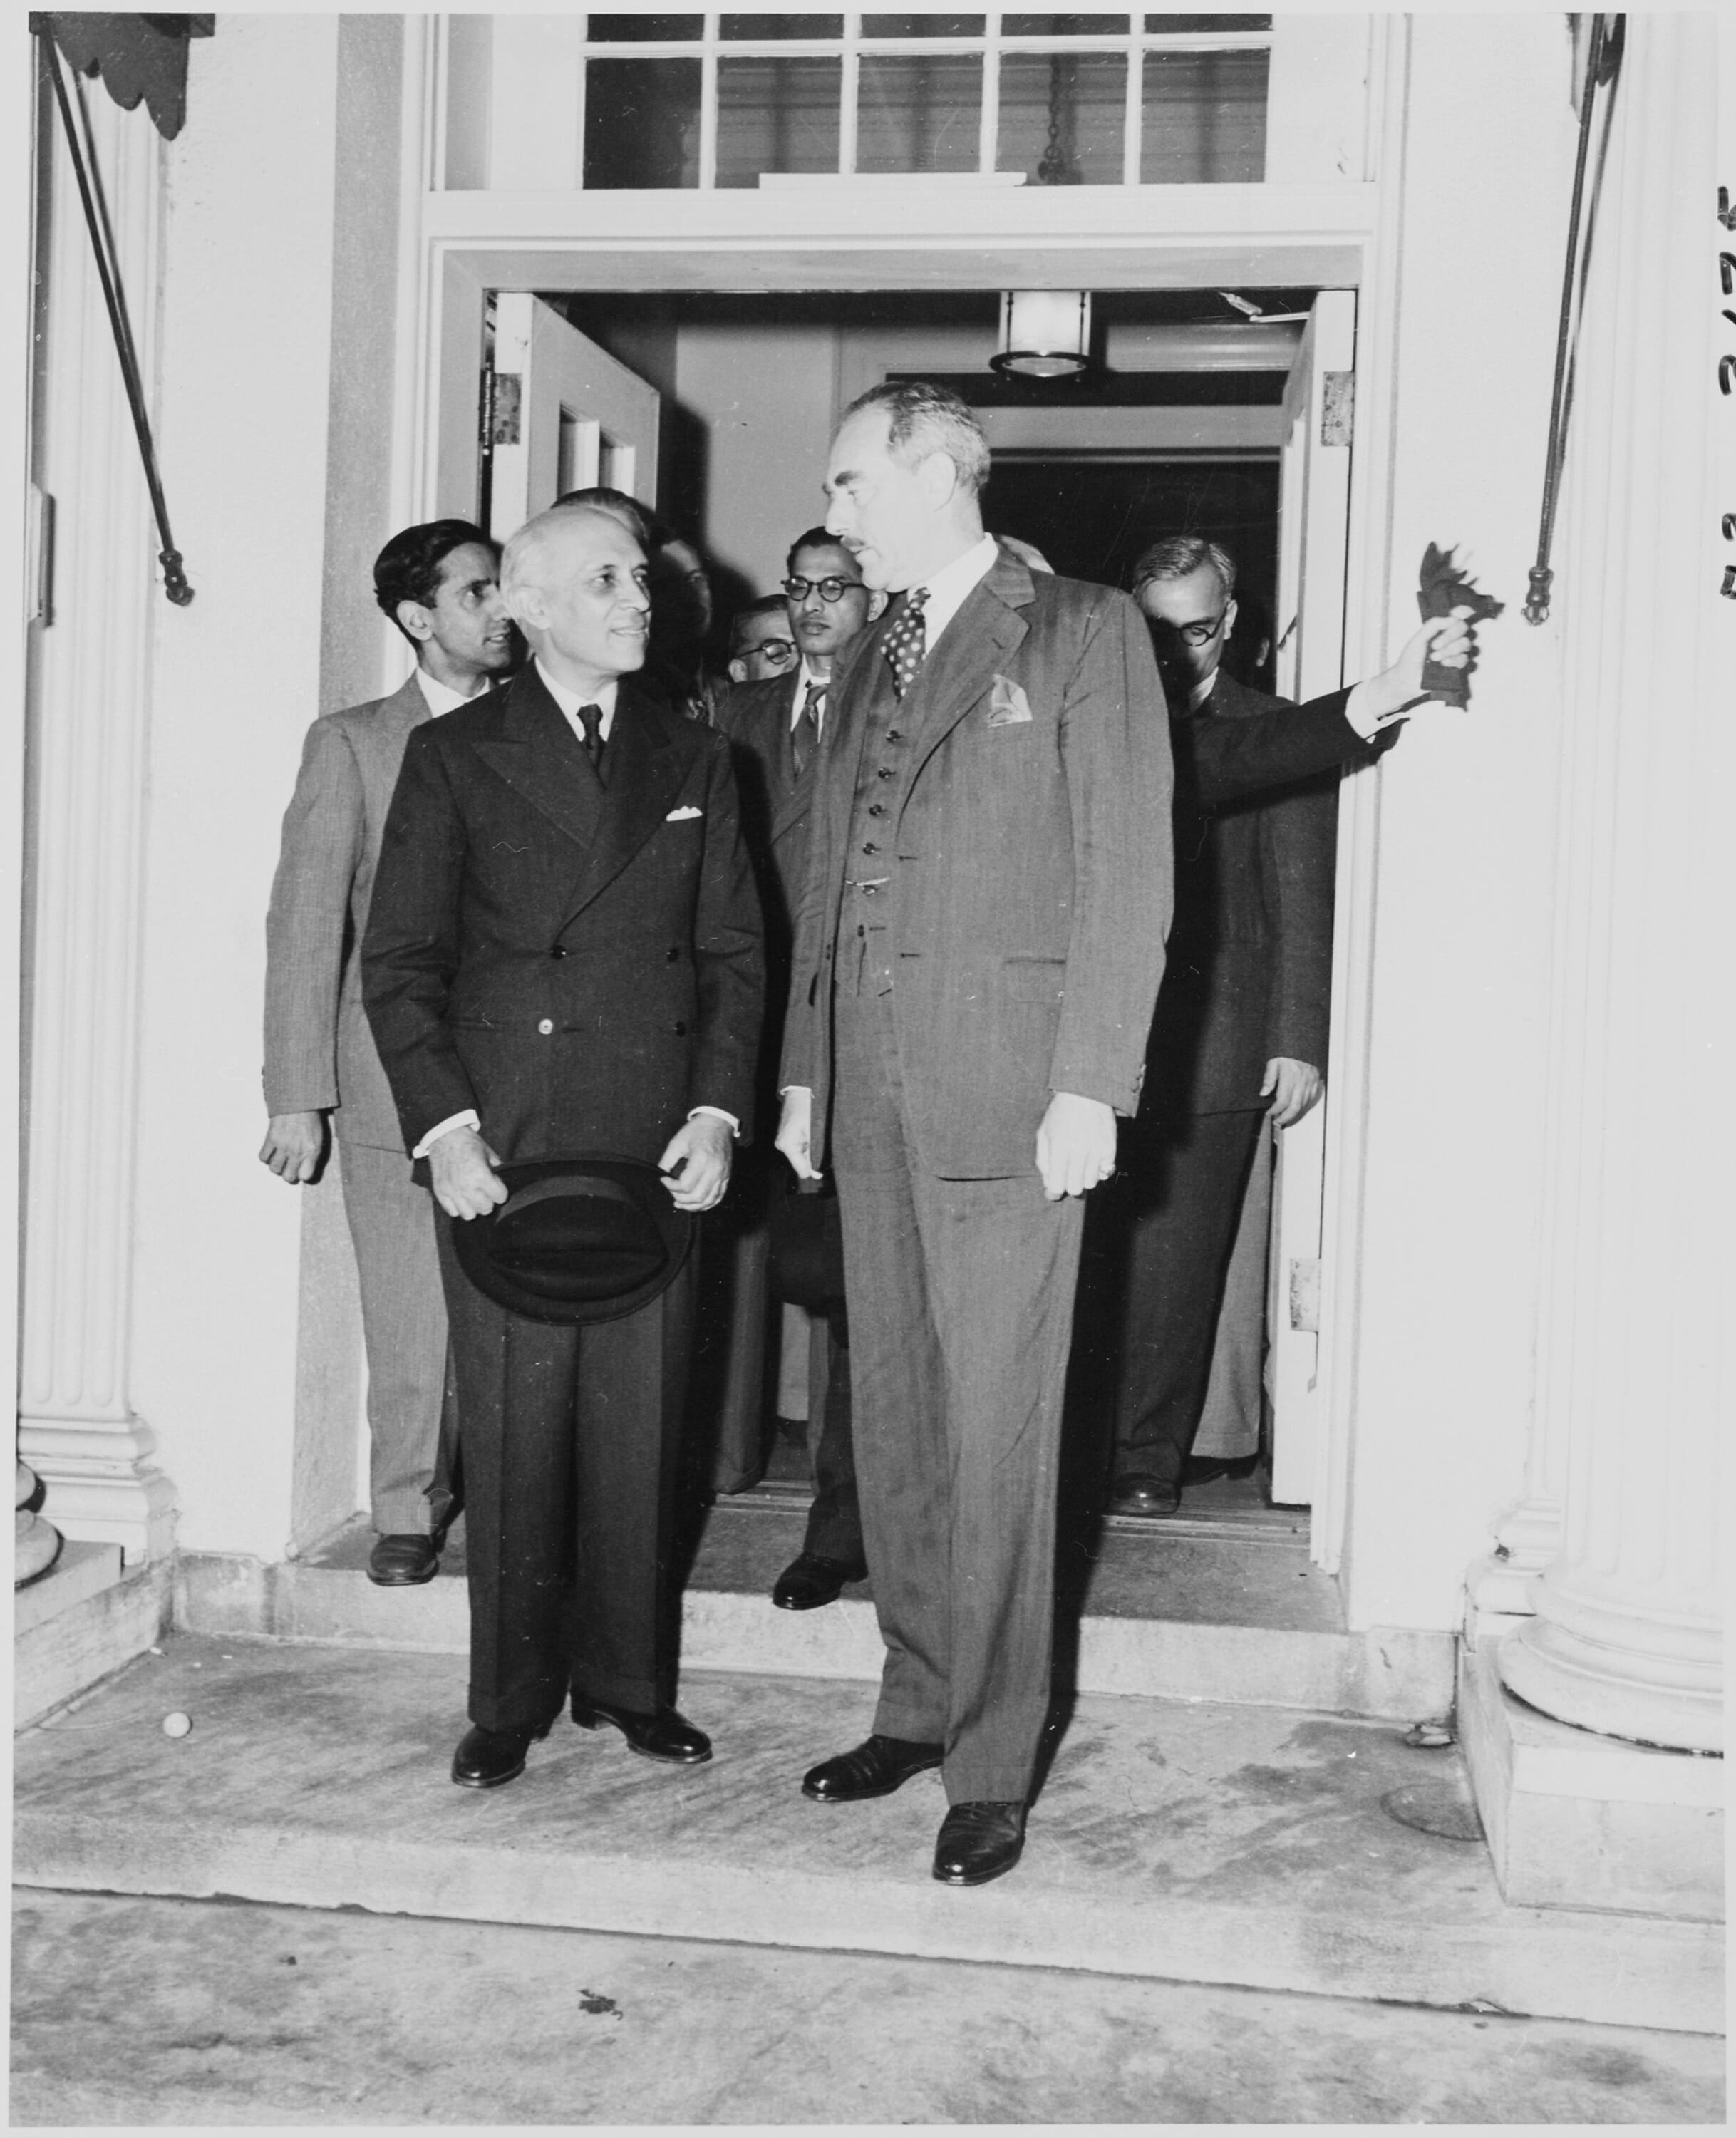 Photograph_of_Prime_Minister_Jawaharlal_Nehru_of_India_with_Secretary_of_State_Dean_Acheson._-_NARA_-_200157